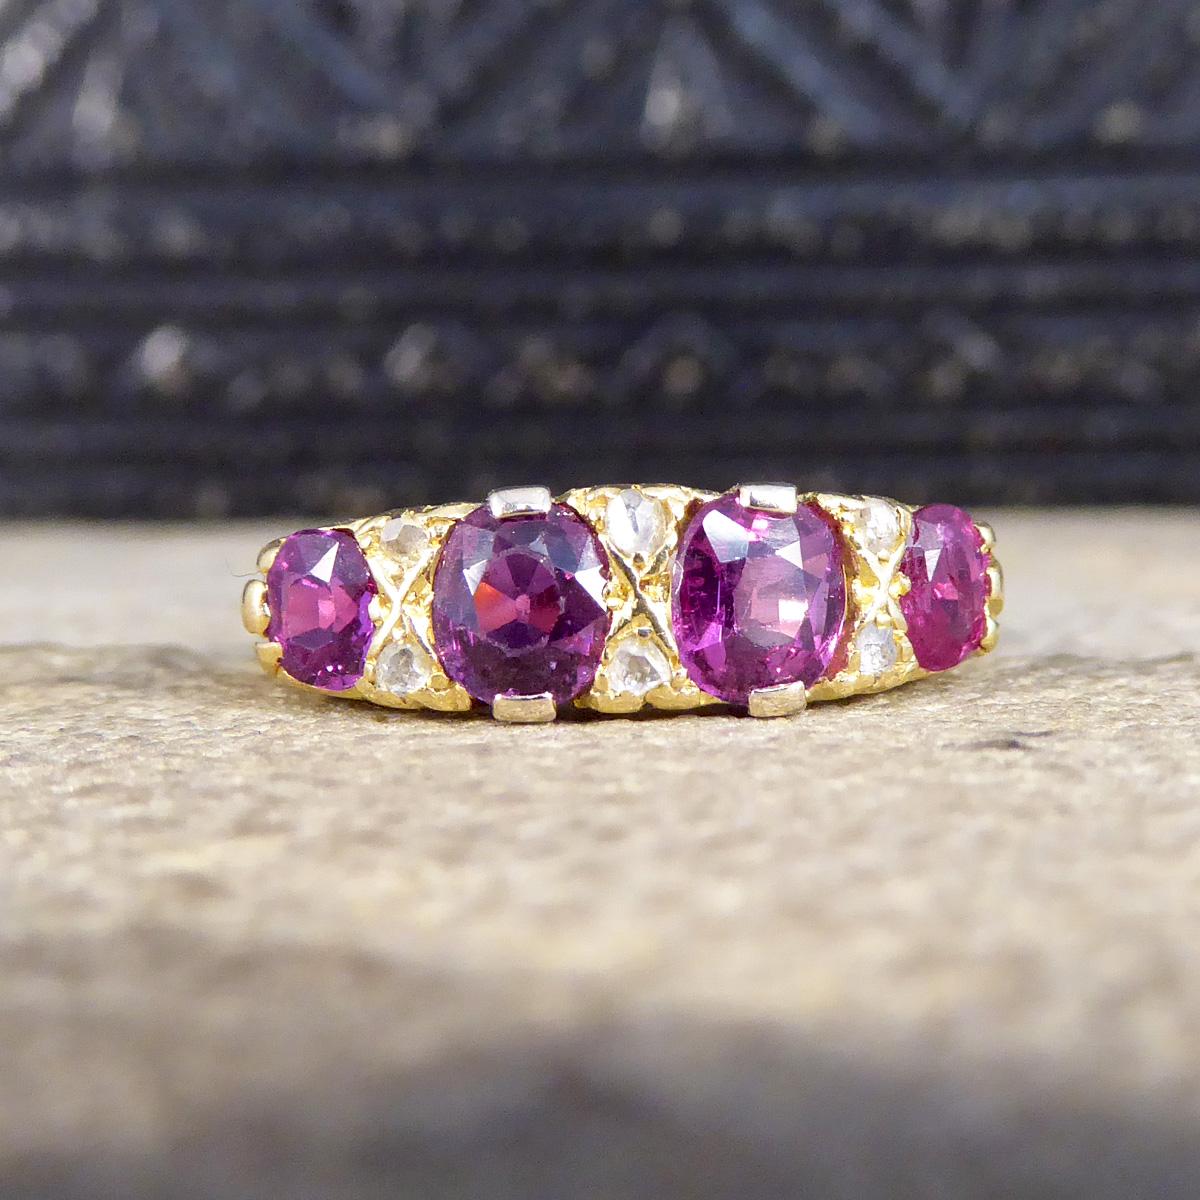 This antique ring was crafted in the Edwardian era. It features a classic swirl gallery and is set in 18ct yellow gold with clear hallmarks on the inner band showing it was crafted in 1907 in Birmingham England. The Rubies are bright and beautiful